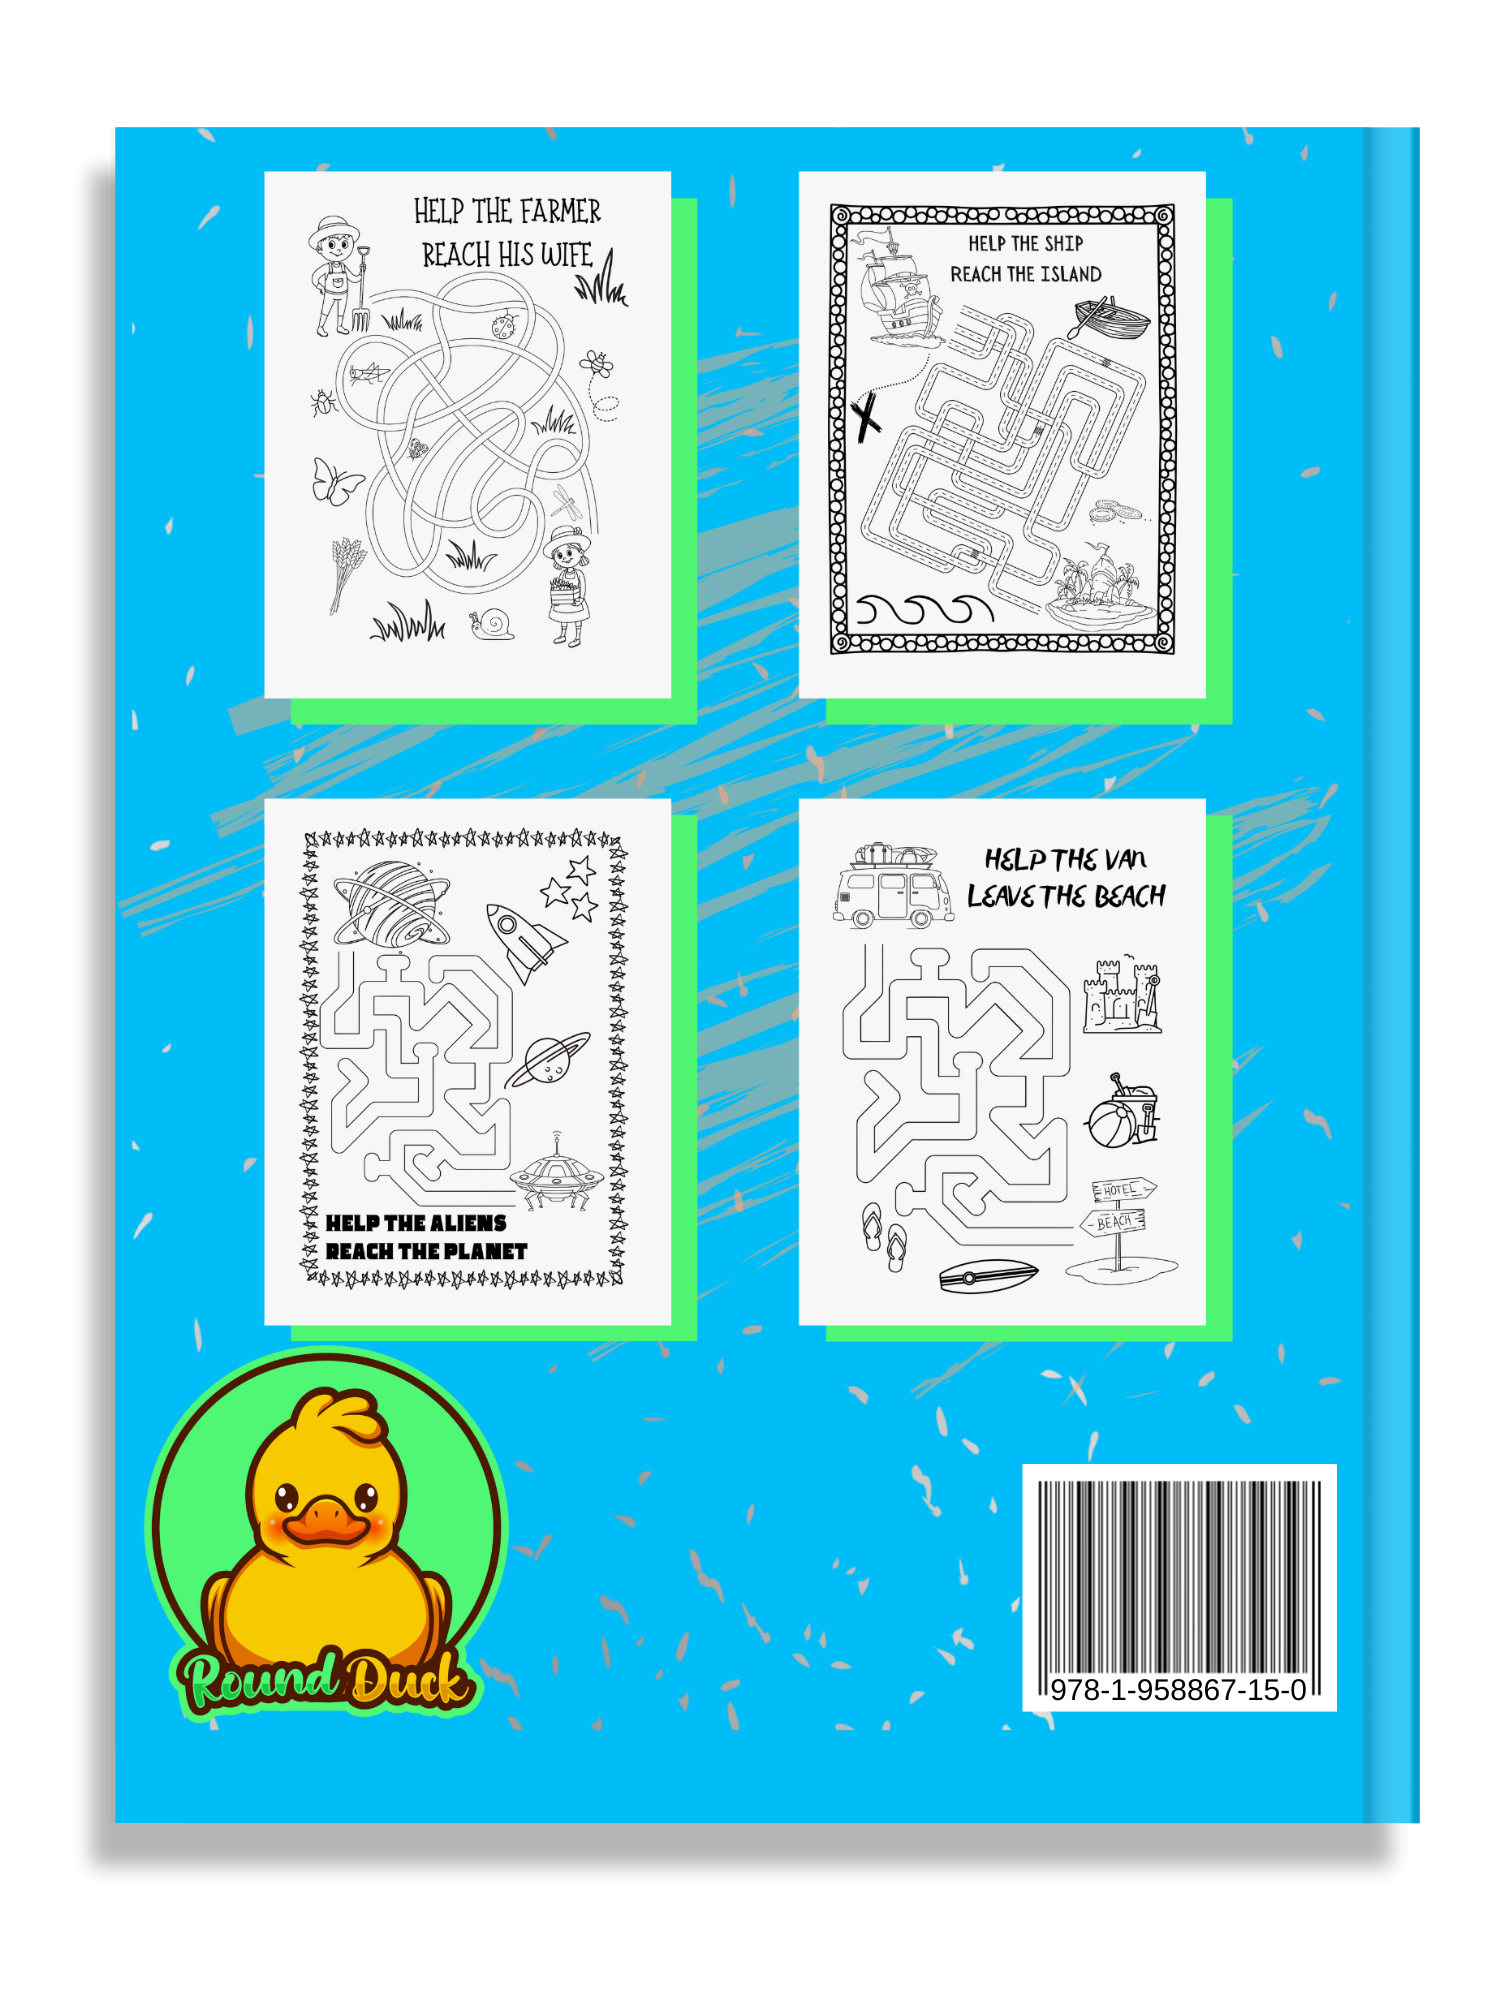 Mazes: Maze Puzzles and Coloring Book for Kids Ages 4-6 | Green (Mazes for  Kids)